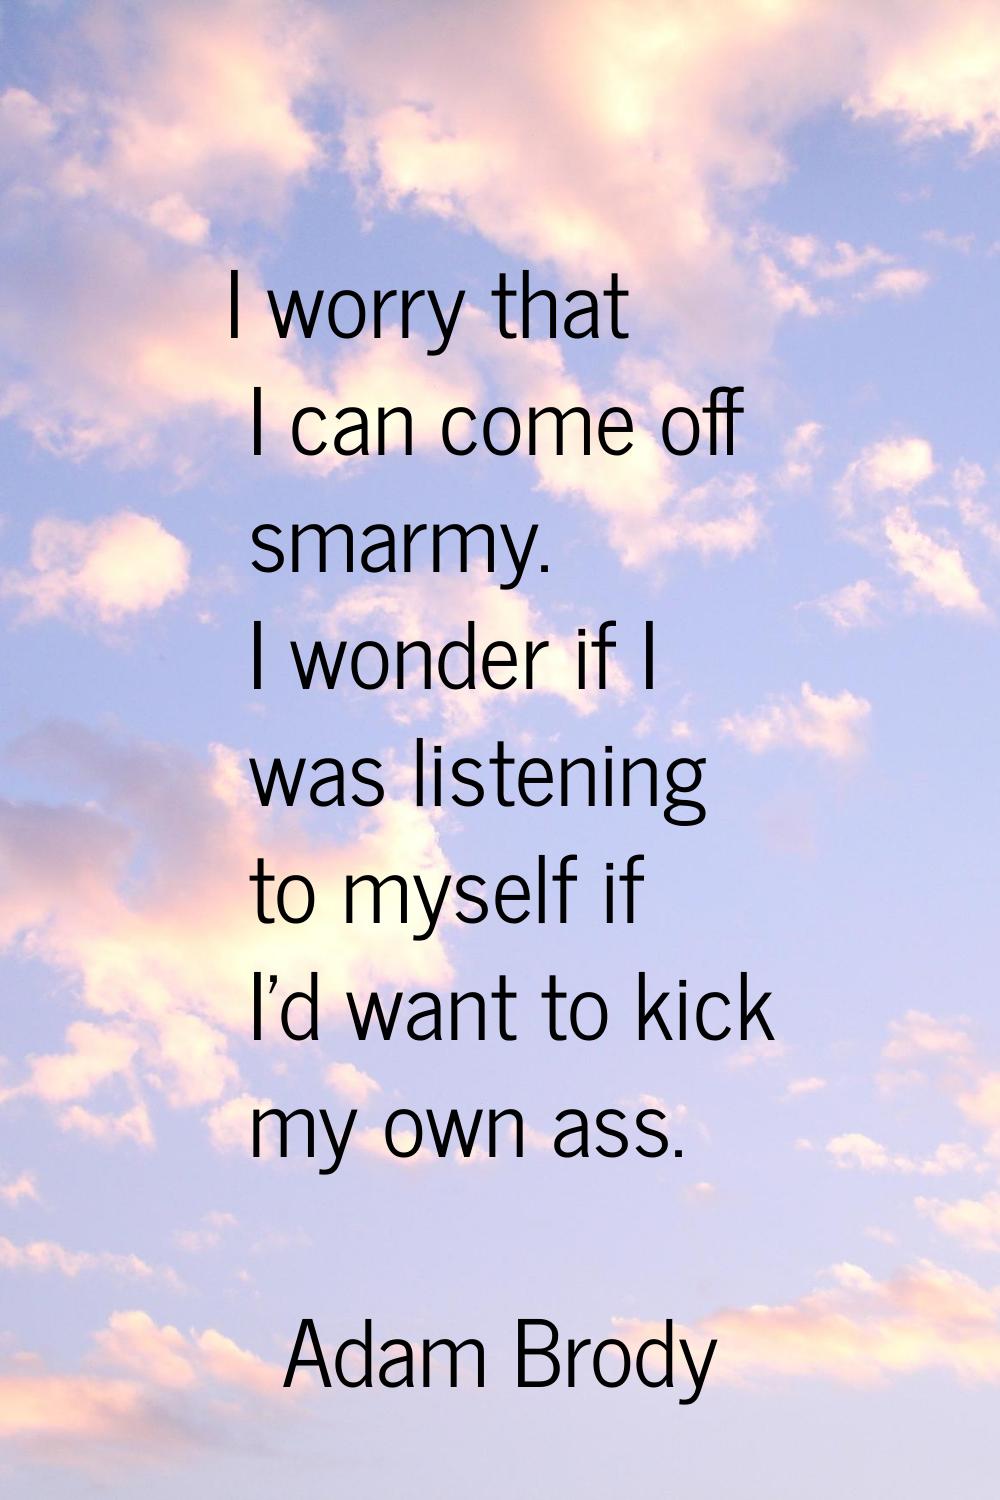 I worry that I can come off smarmy. I wonder if I was listening to myself if I'd want to kick my ow